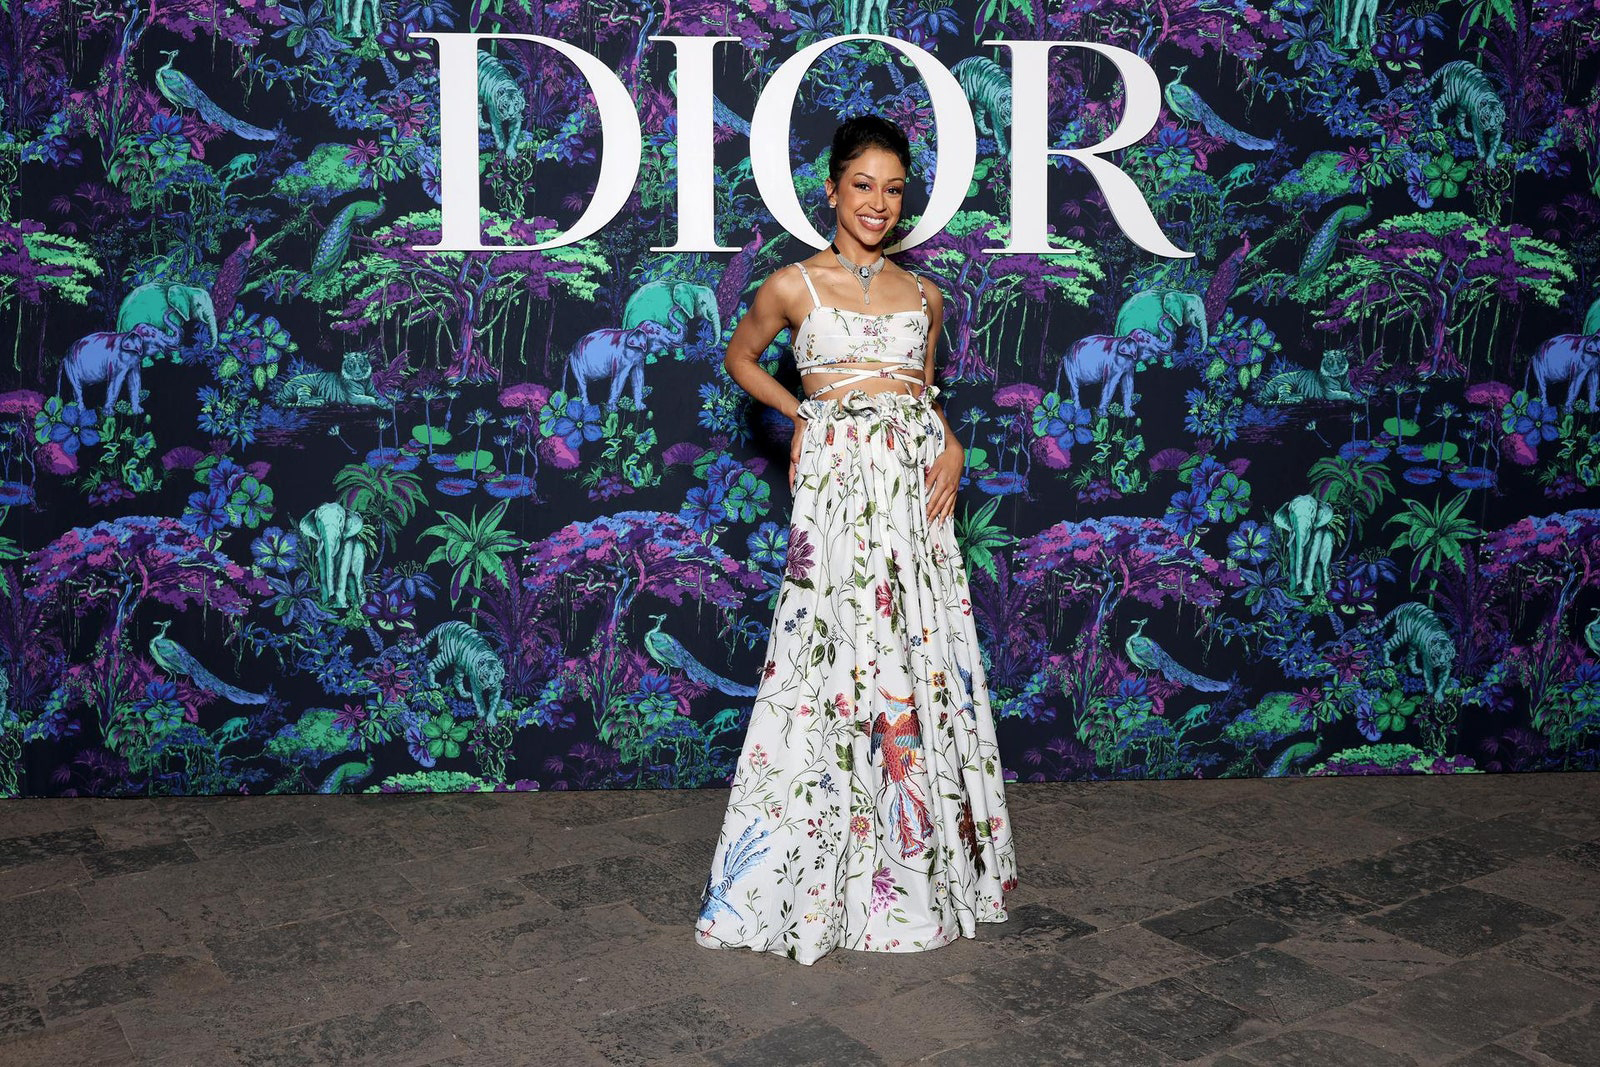 Dior Fall/Winter 2023 Show In Mumbai Liza Koshy wore a Dior Spring-Summer 2023 white printed cotton top and skirt